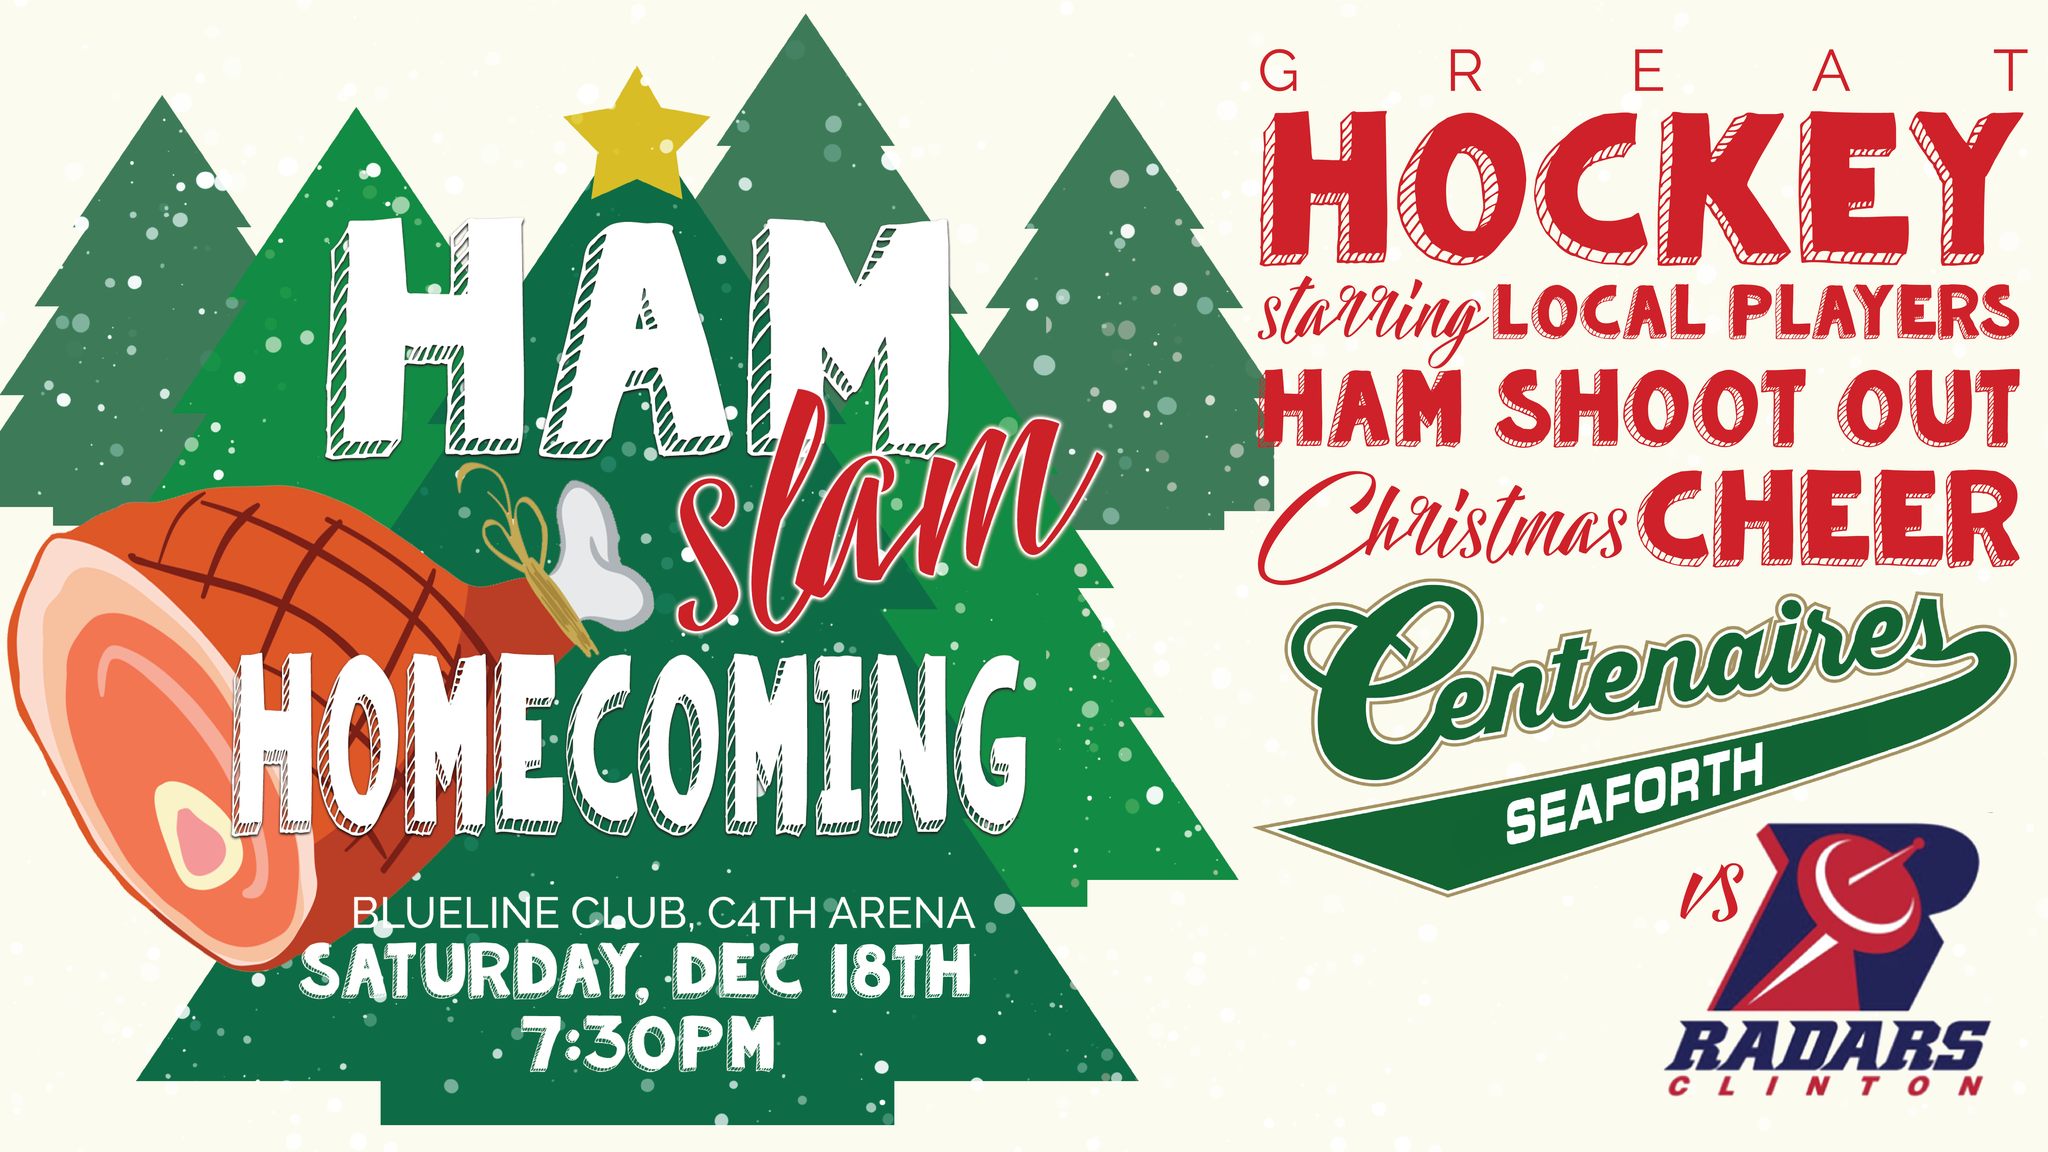 ham slam homecoming takes place this weekend in seaforth